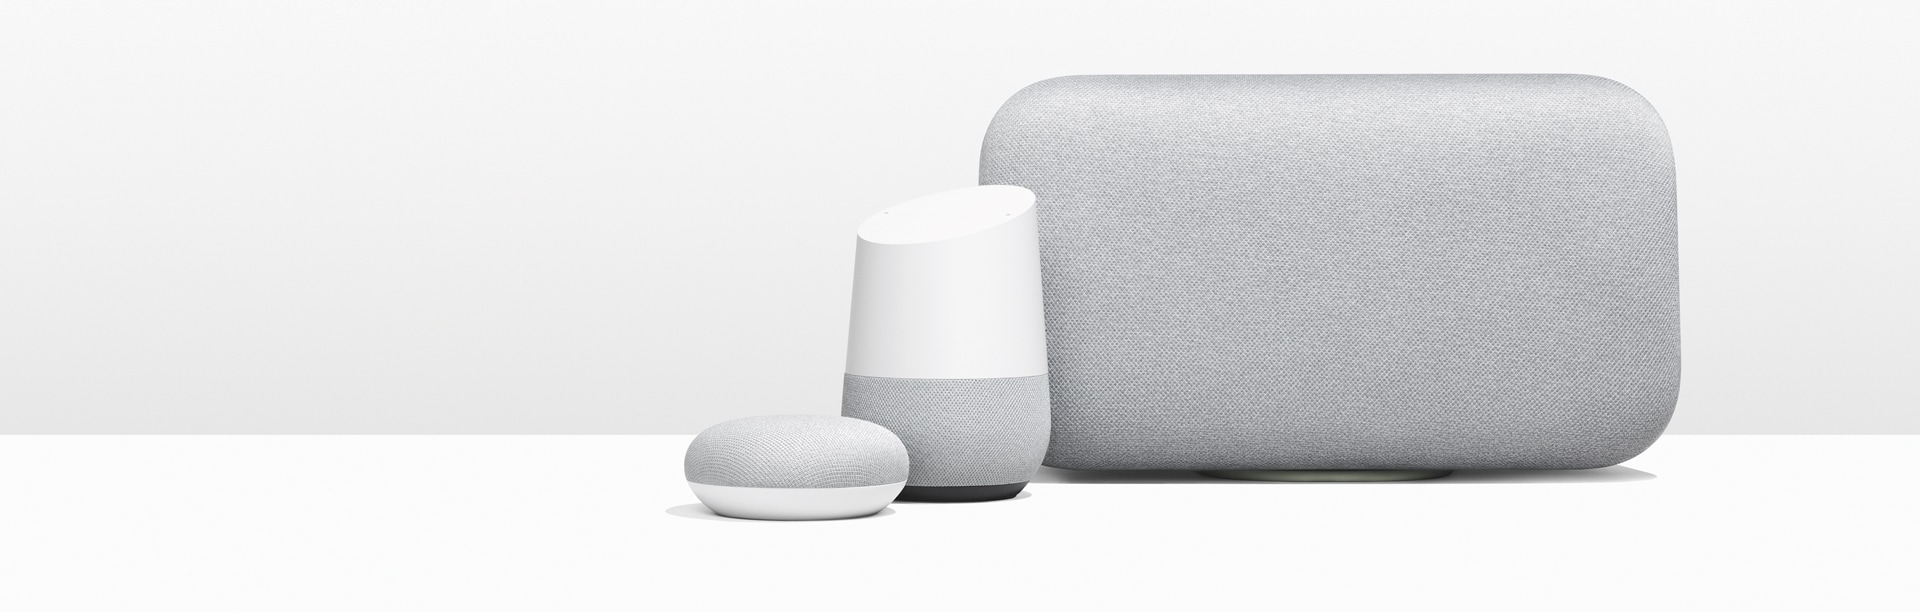 Connect Google Home